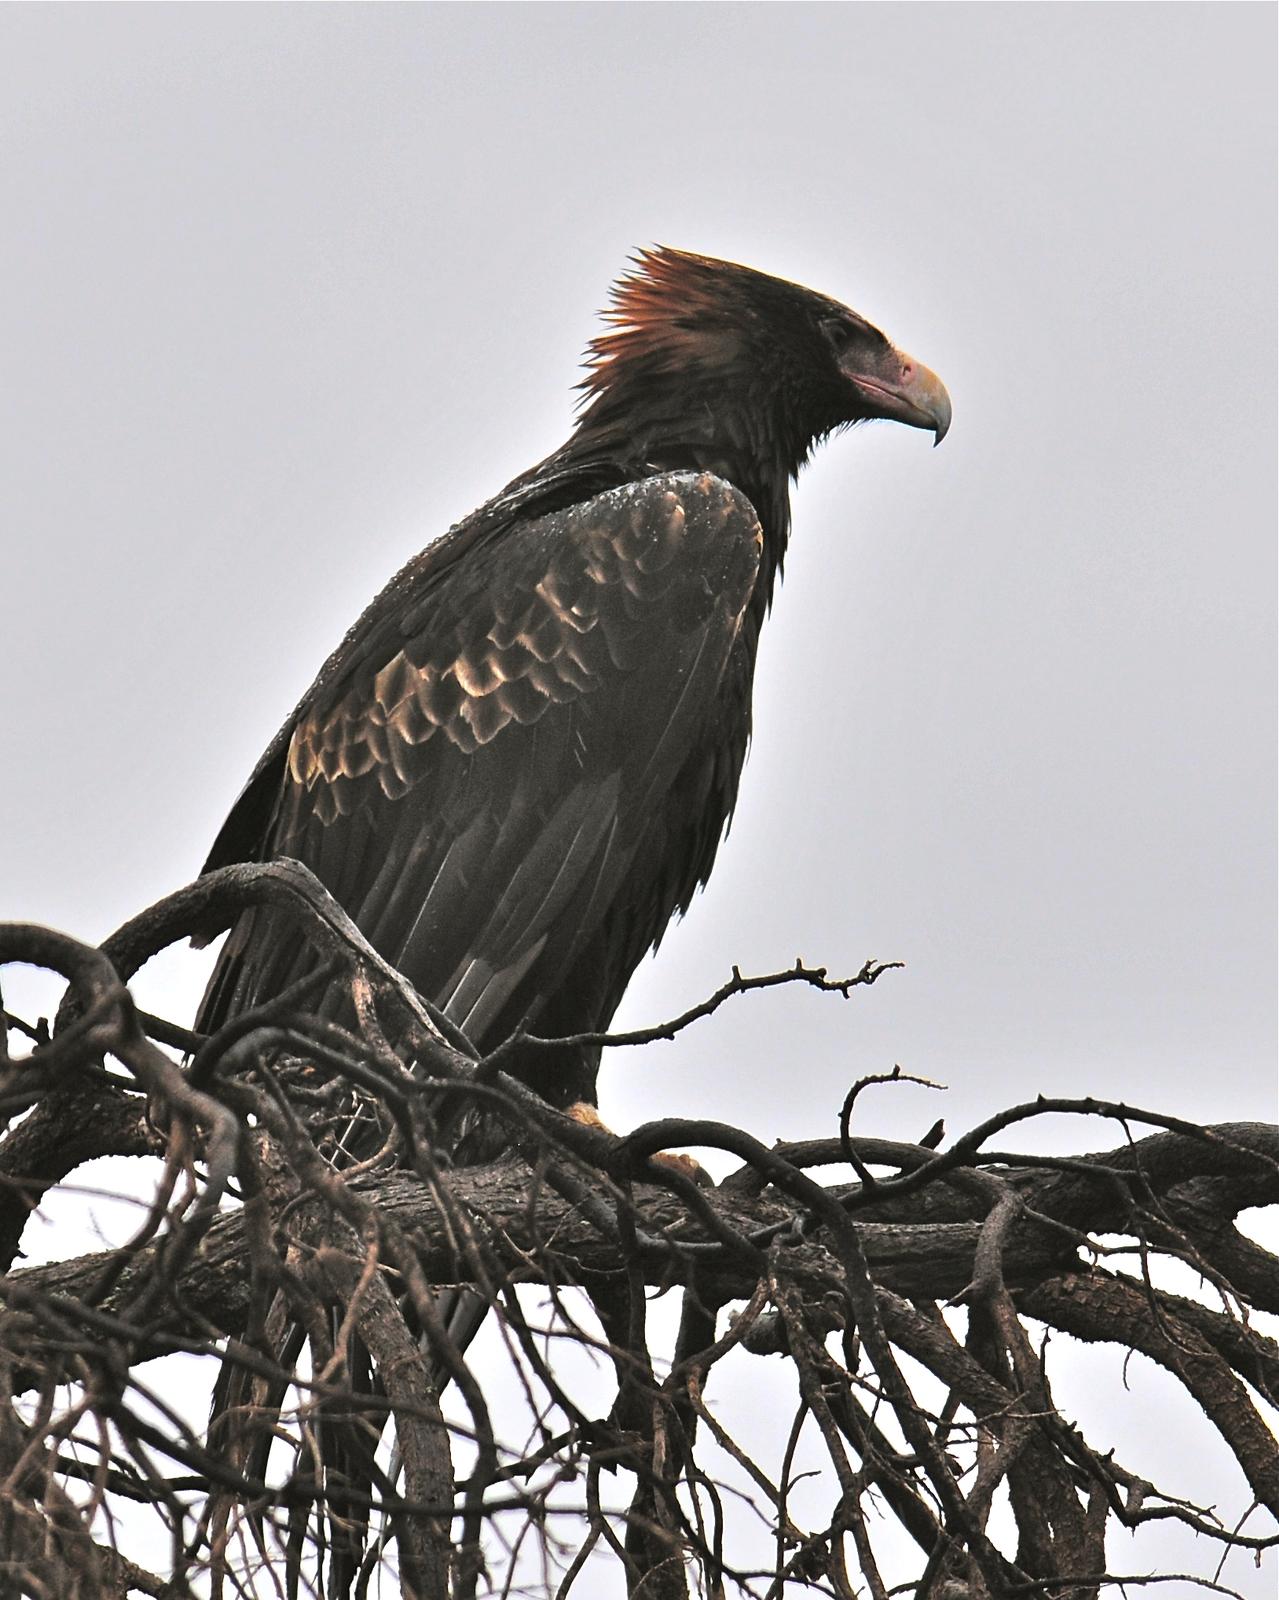 Wedge-tailed Eagle Photo by Gerald Friesen